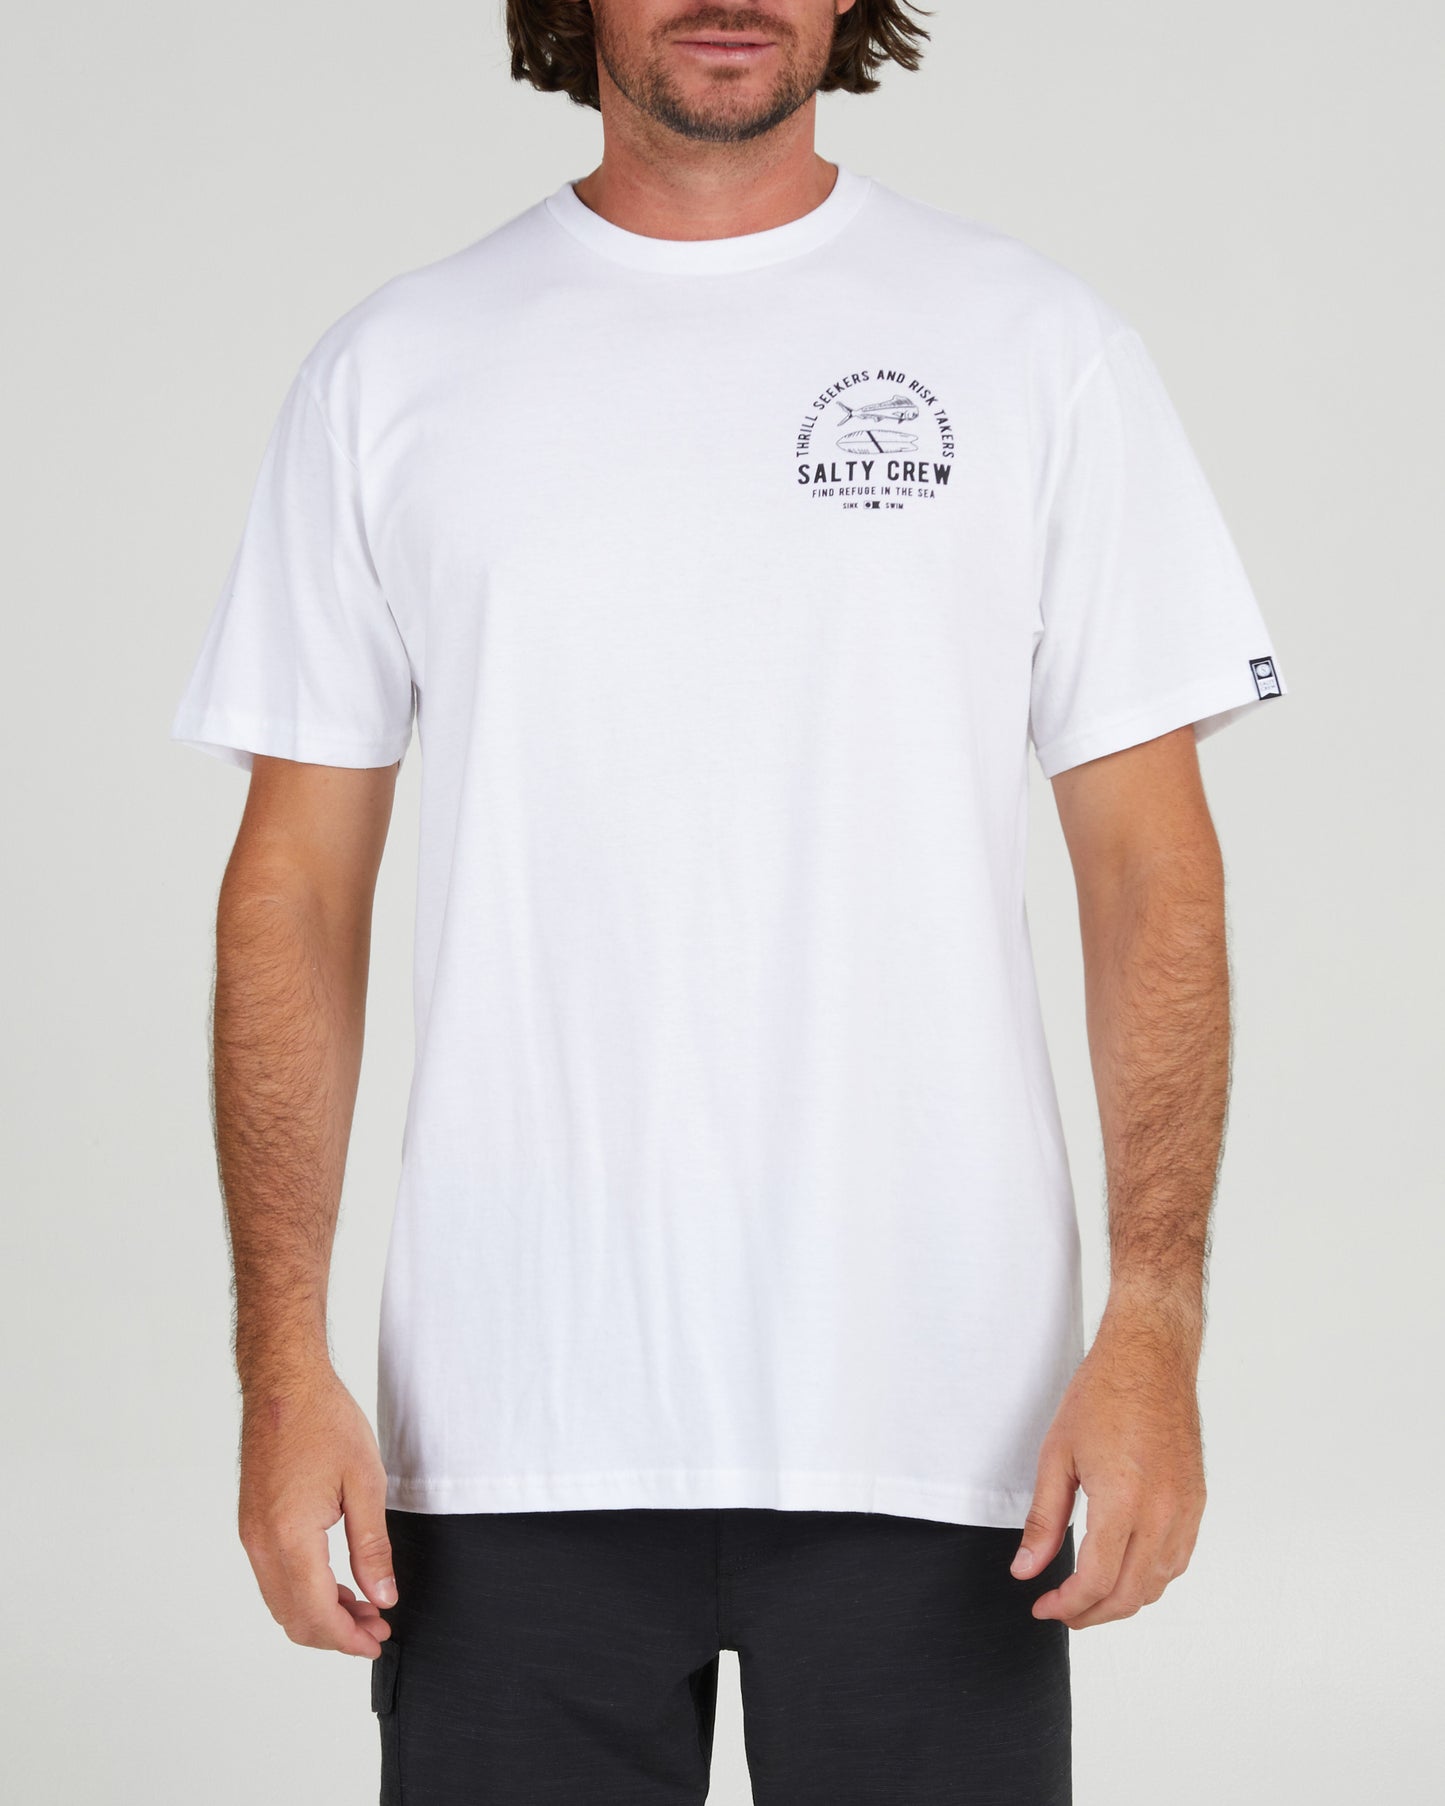 On body front of the Lateral Line White S/S Standard Tee